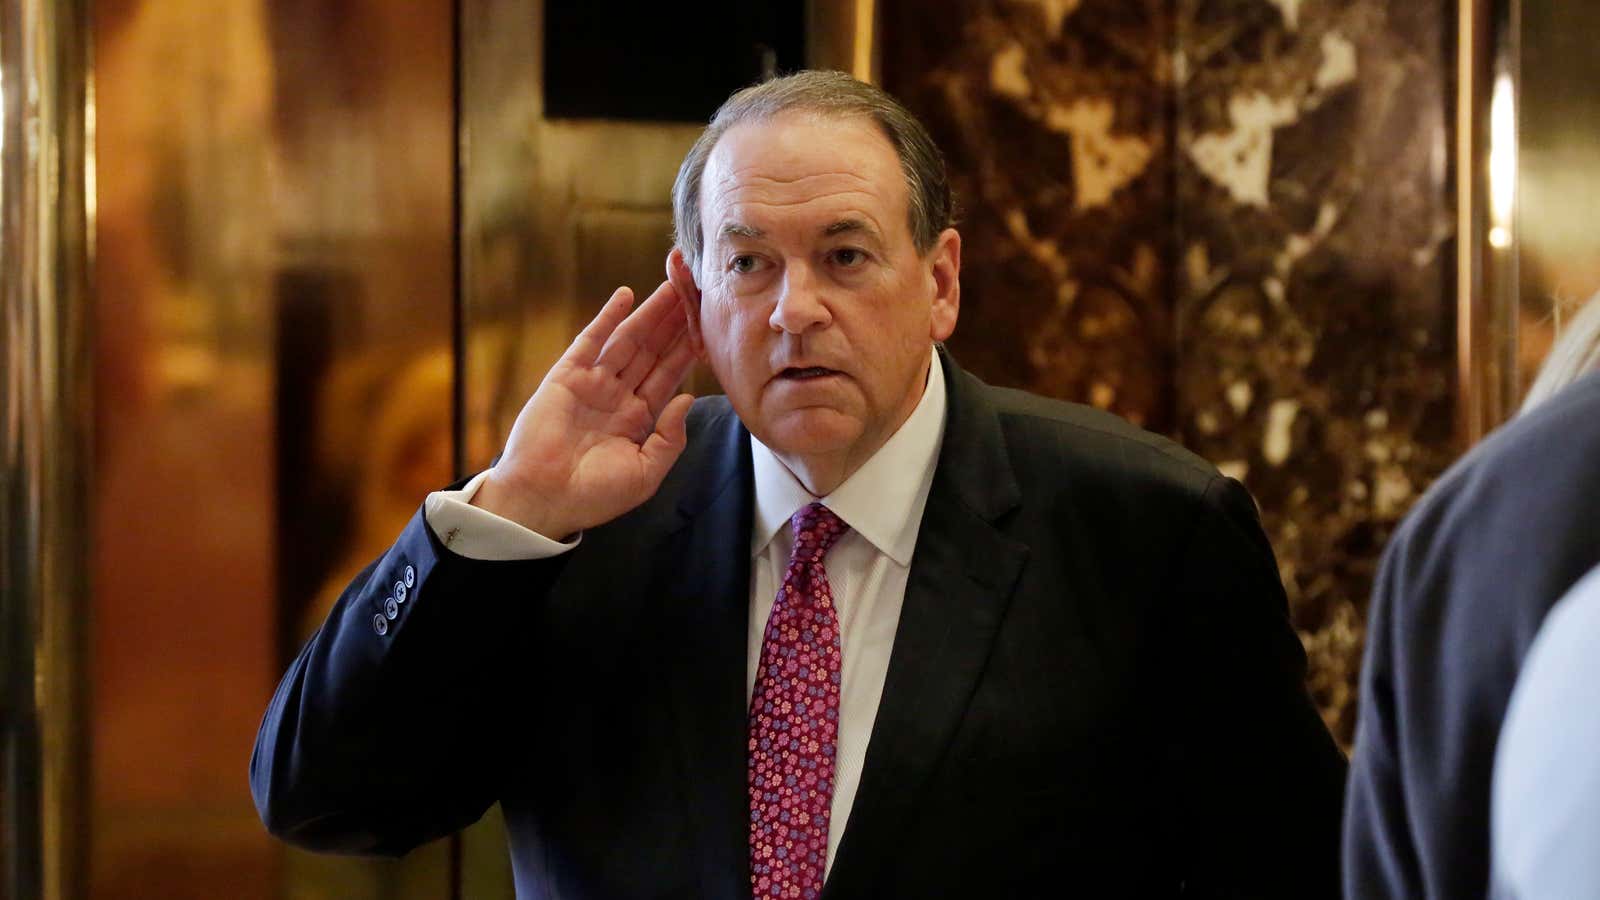 Governor Huckabee plans to immediately move the US embassy from Tel Aviv to Jerusalem.